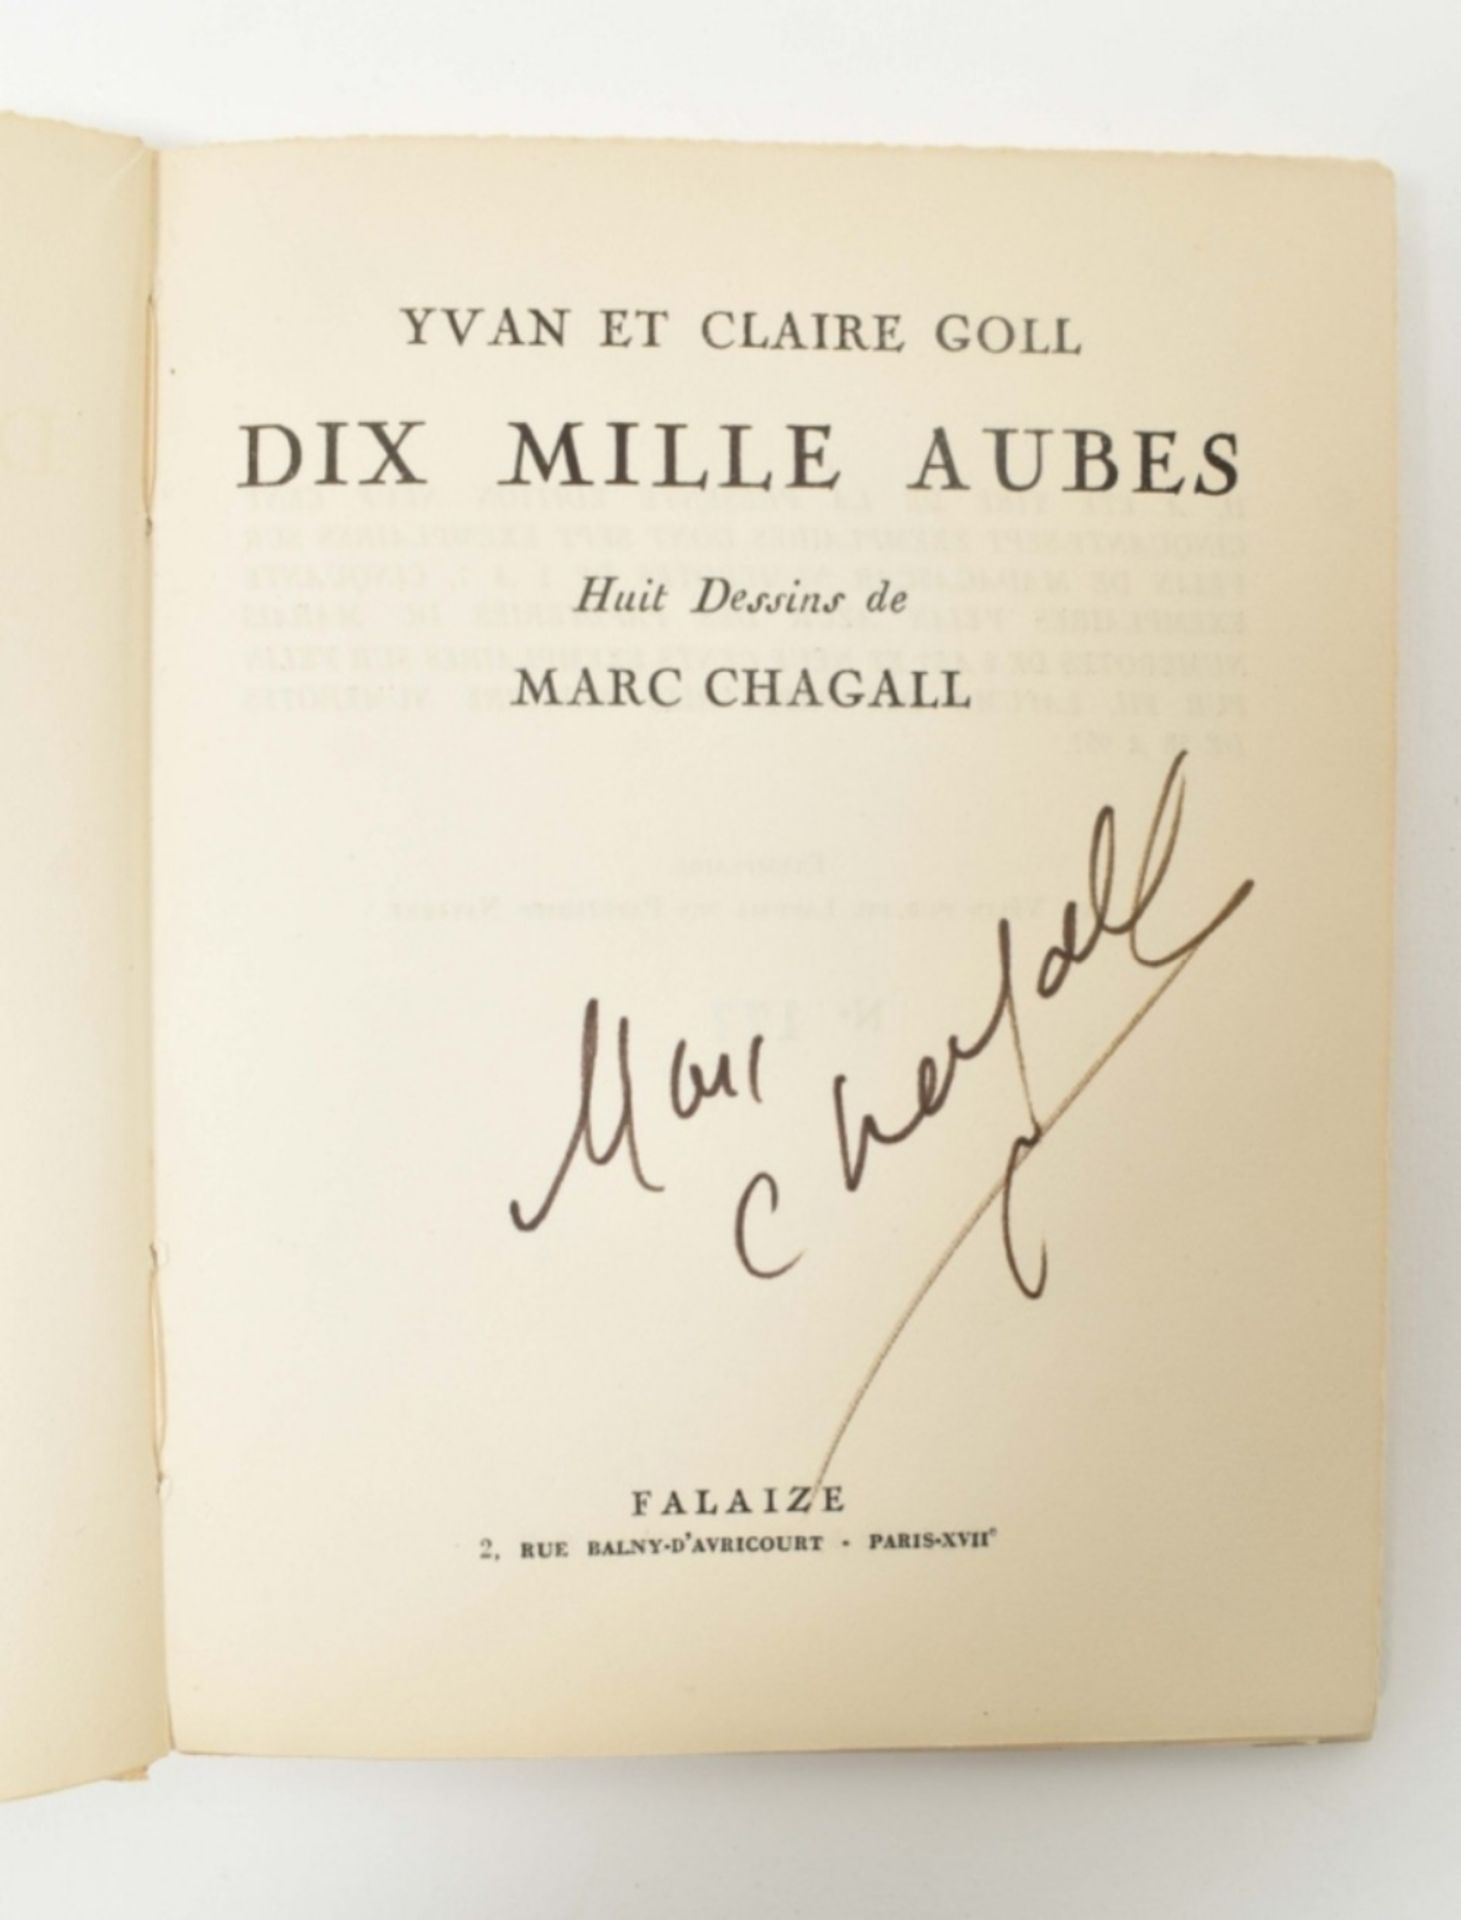 Yvan and Claire Goll. Dix mille aubes - Image 4 of 8